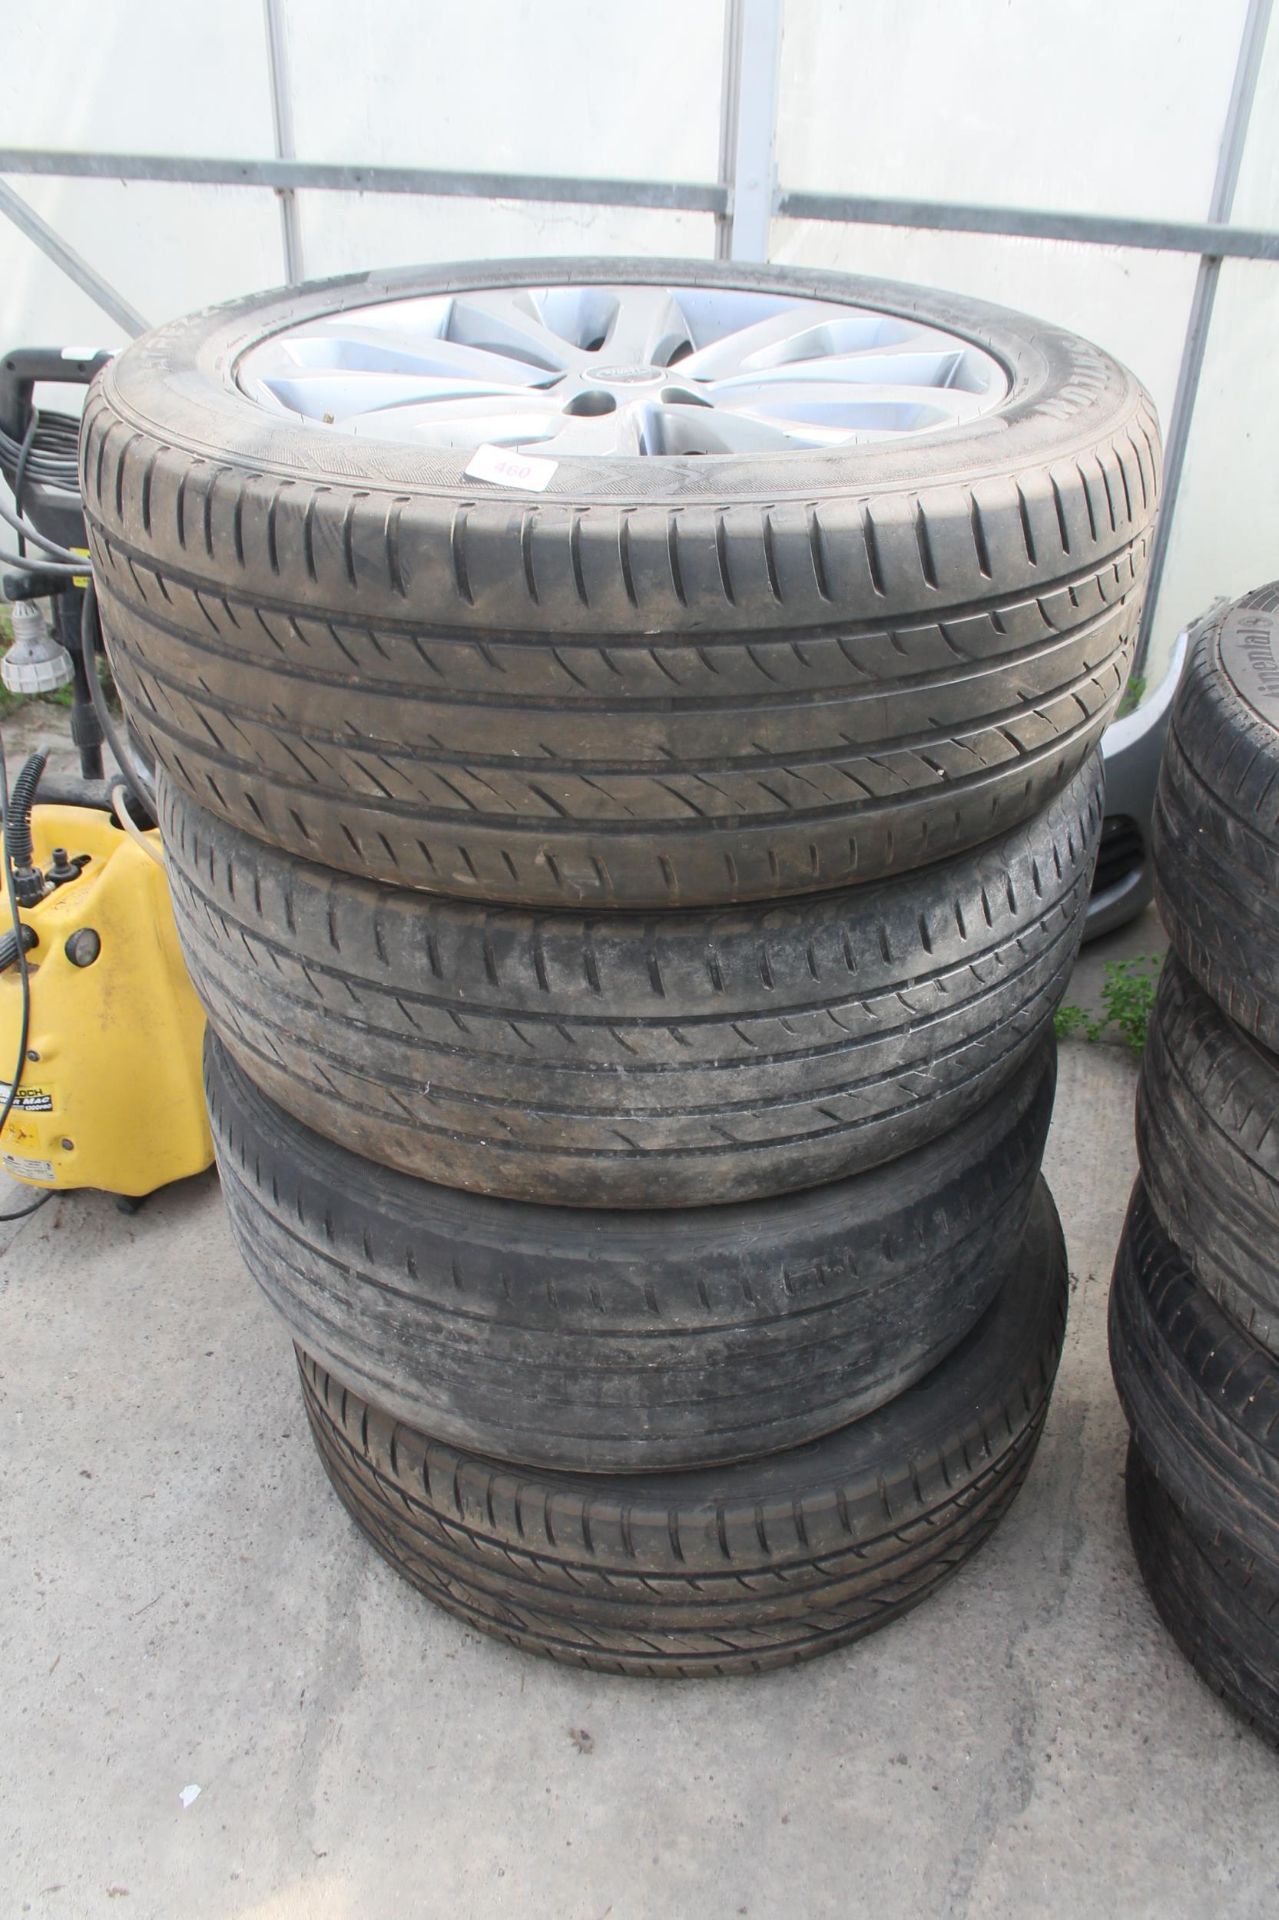 LAND ROVER WHEELS AND TYRES 2 X 5.55.20 NO VAT